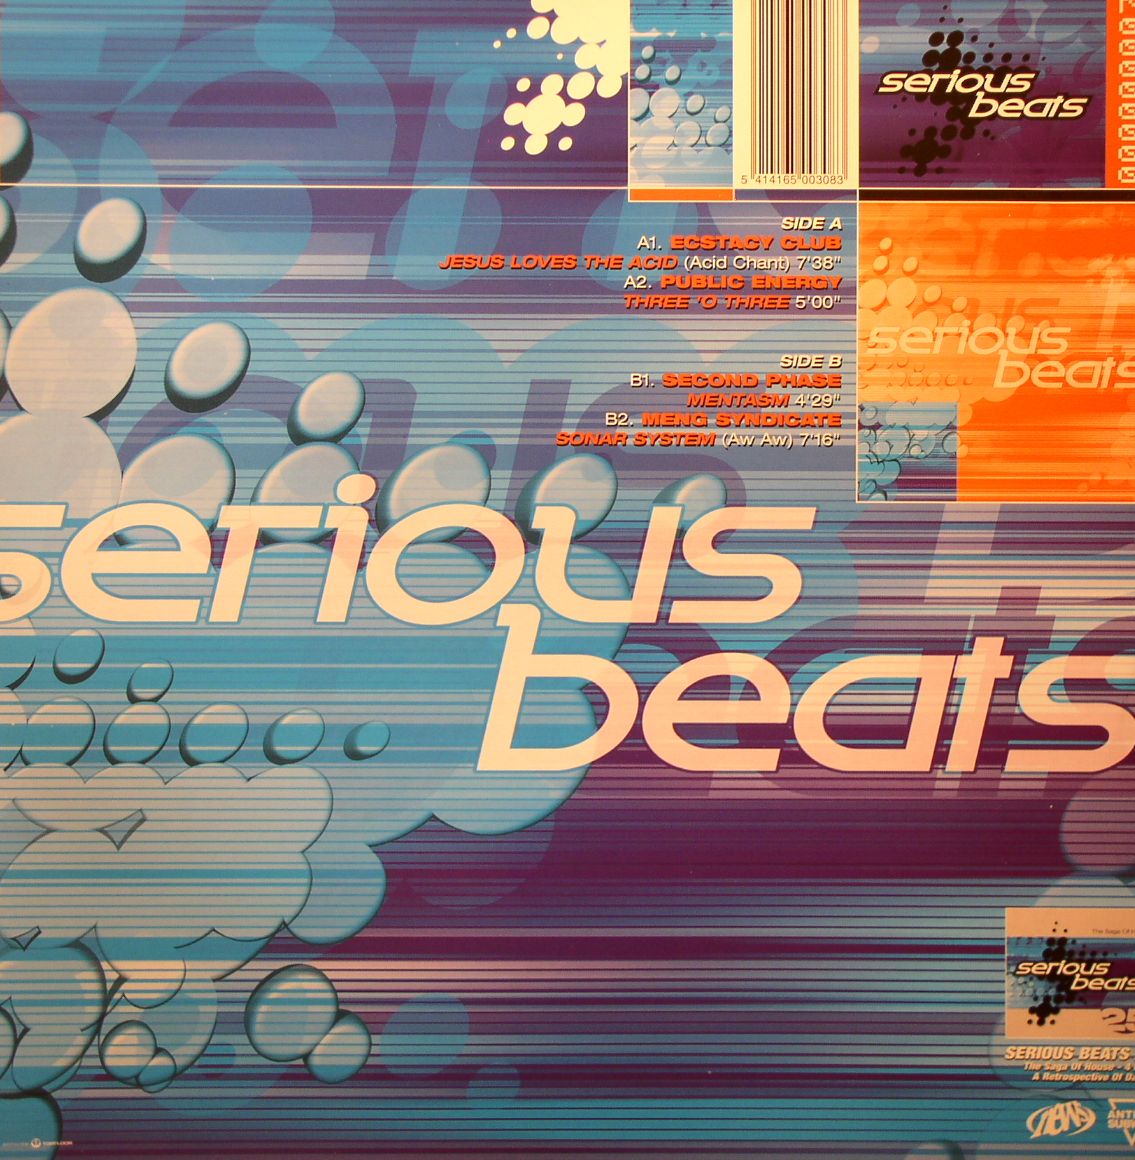 ECSTACY CLUB/PUBLIC ENERGY/SECOND PHASE/MENG SYNDICATE - Serious Beats 7 EP